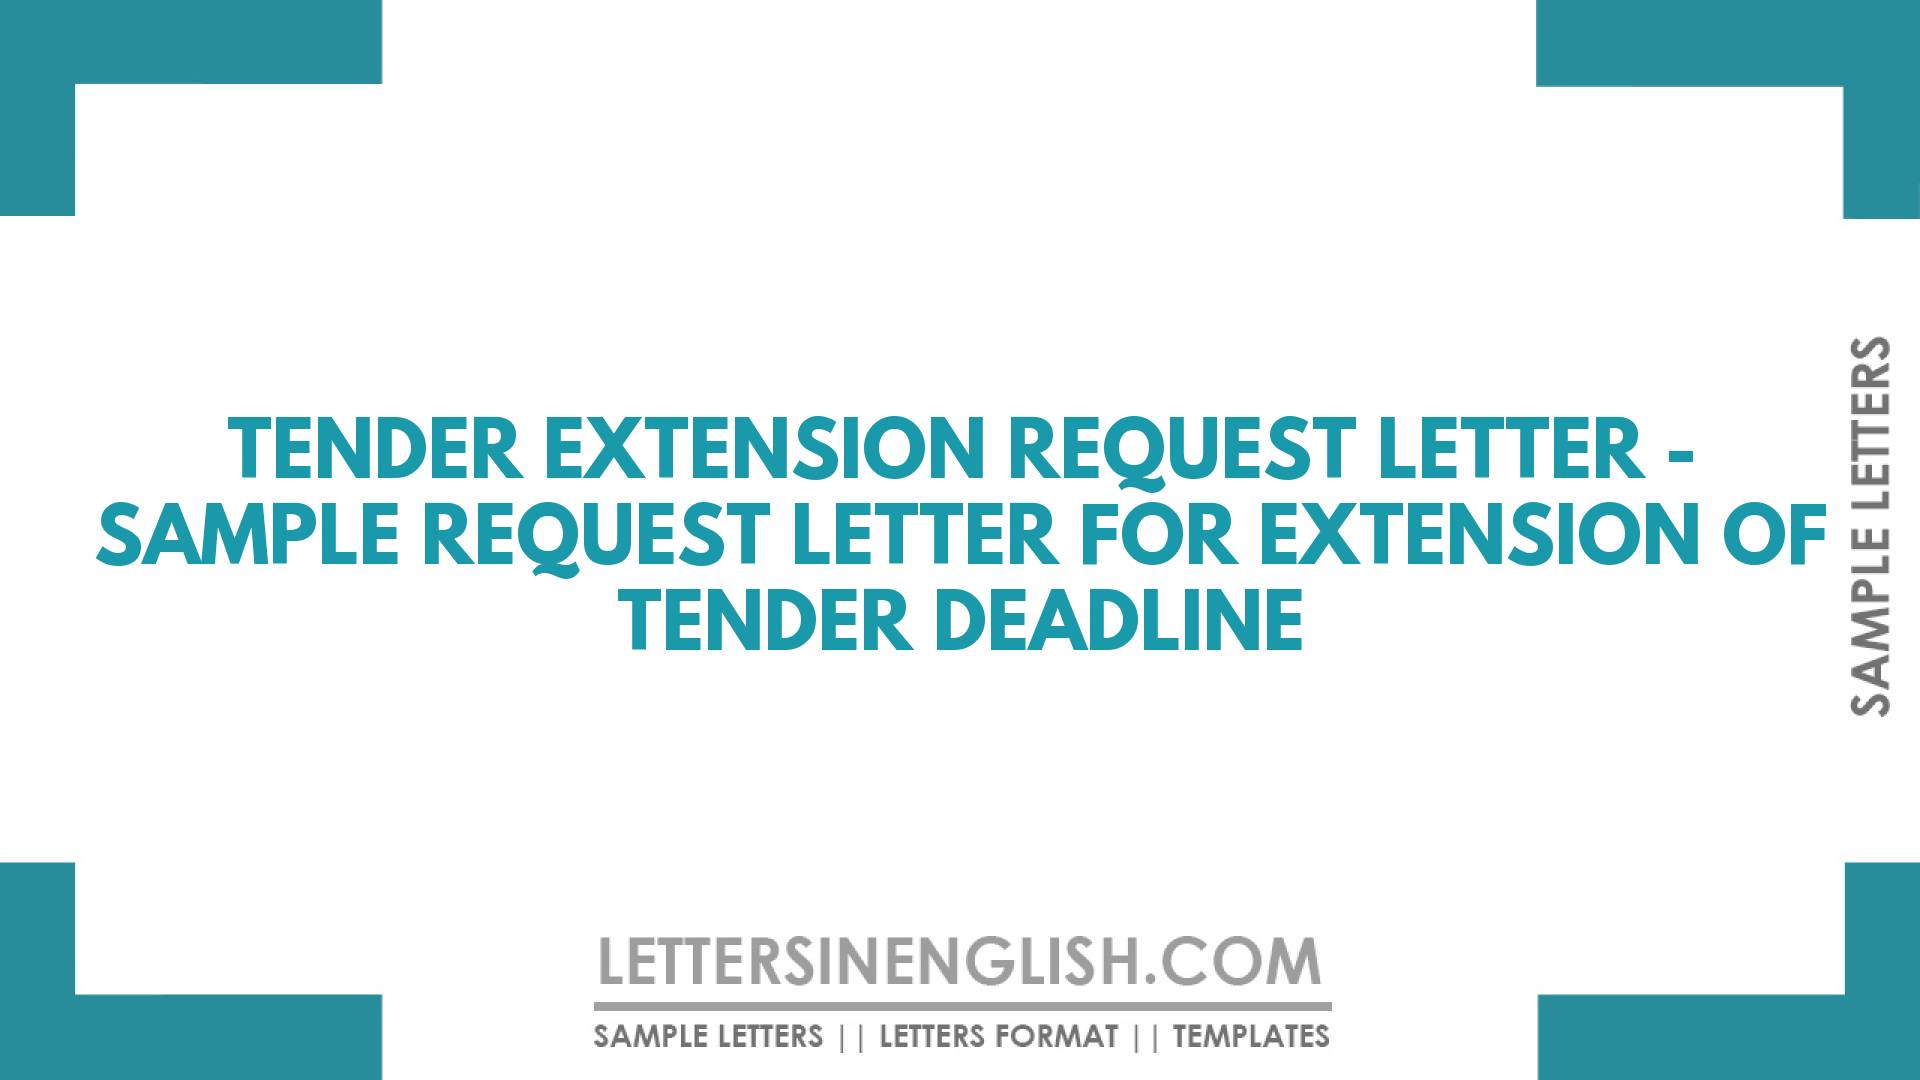 Tender Extension Request Letter – Sample Request Letter for Extension of Tender Deadline